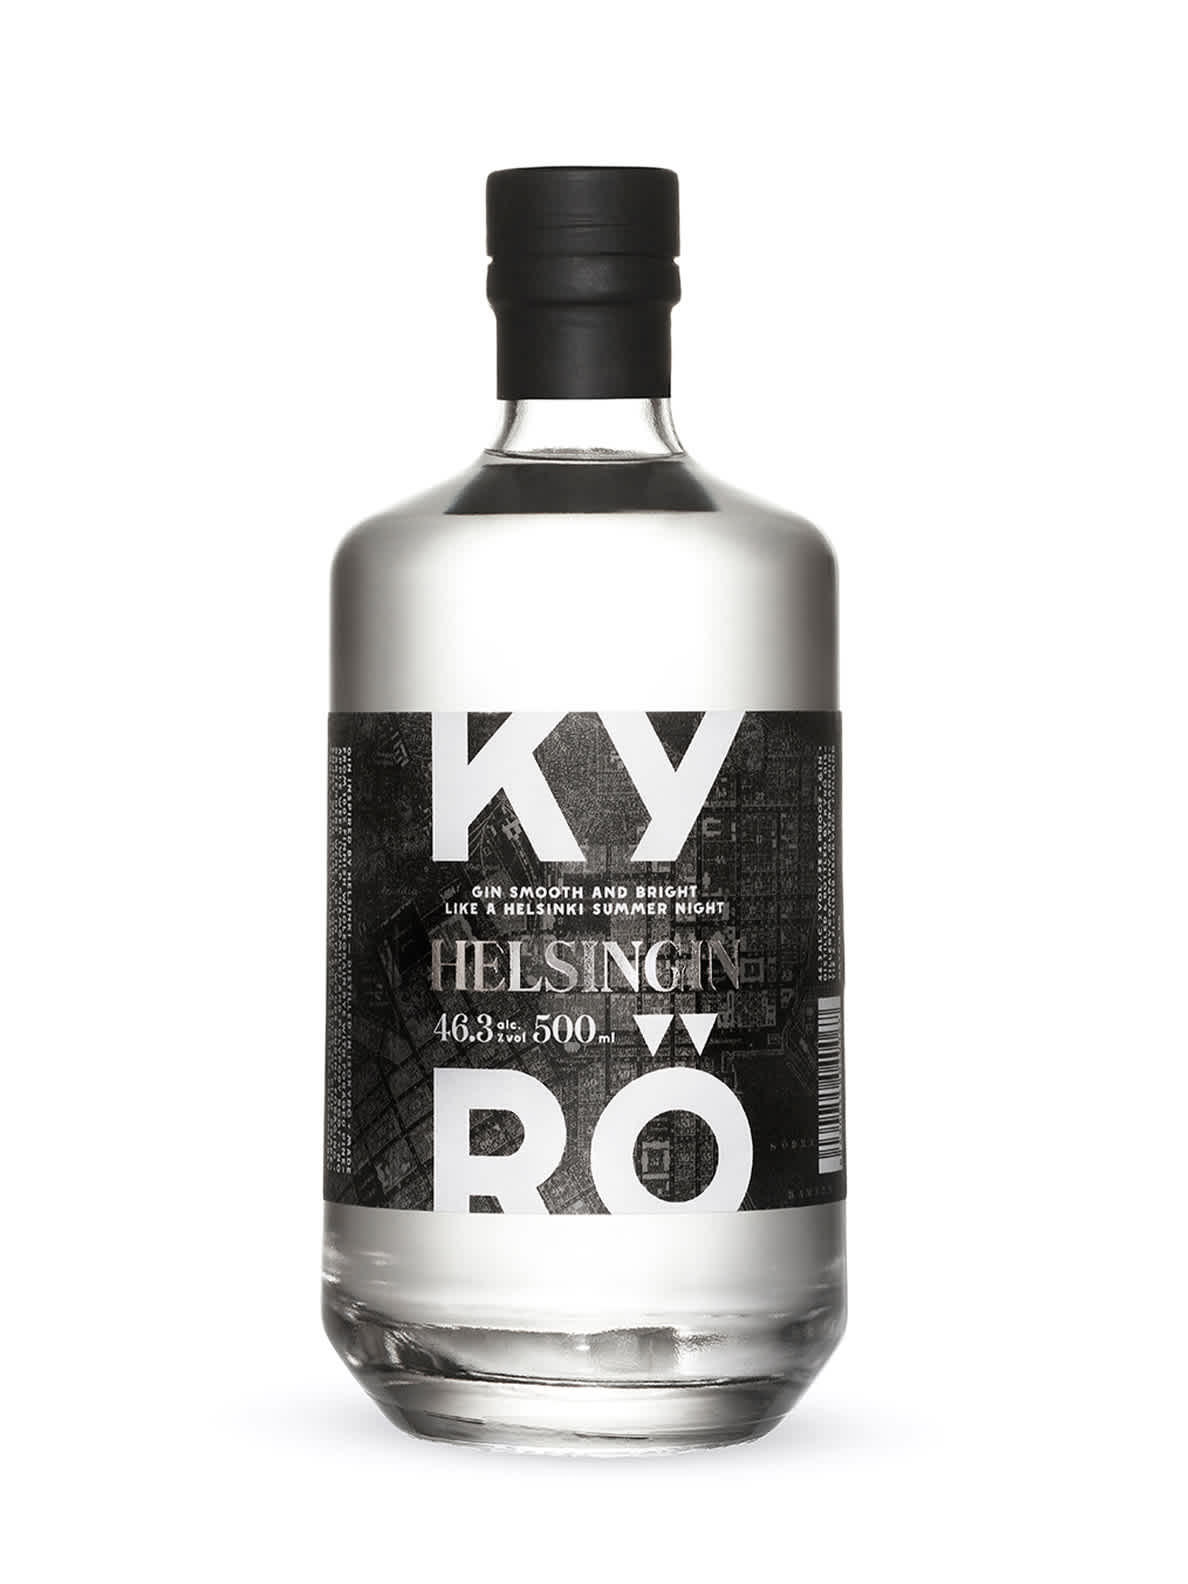 Product photo: a clear, 500ml glass bottle filled with Helsingin made by the Kyrö Distillery Company in Isokyrö, F